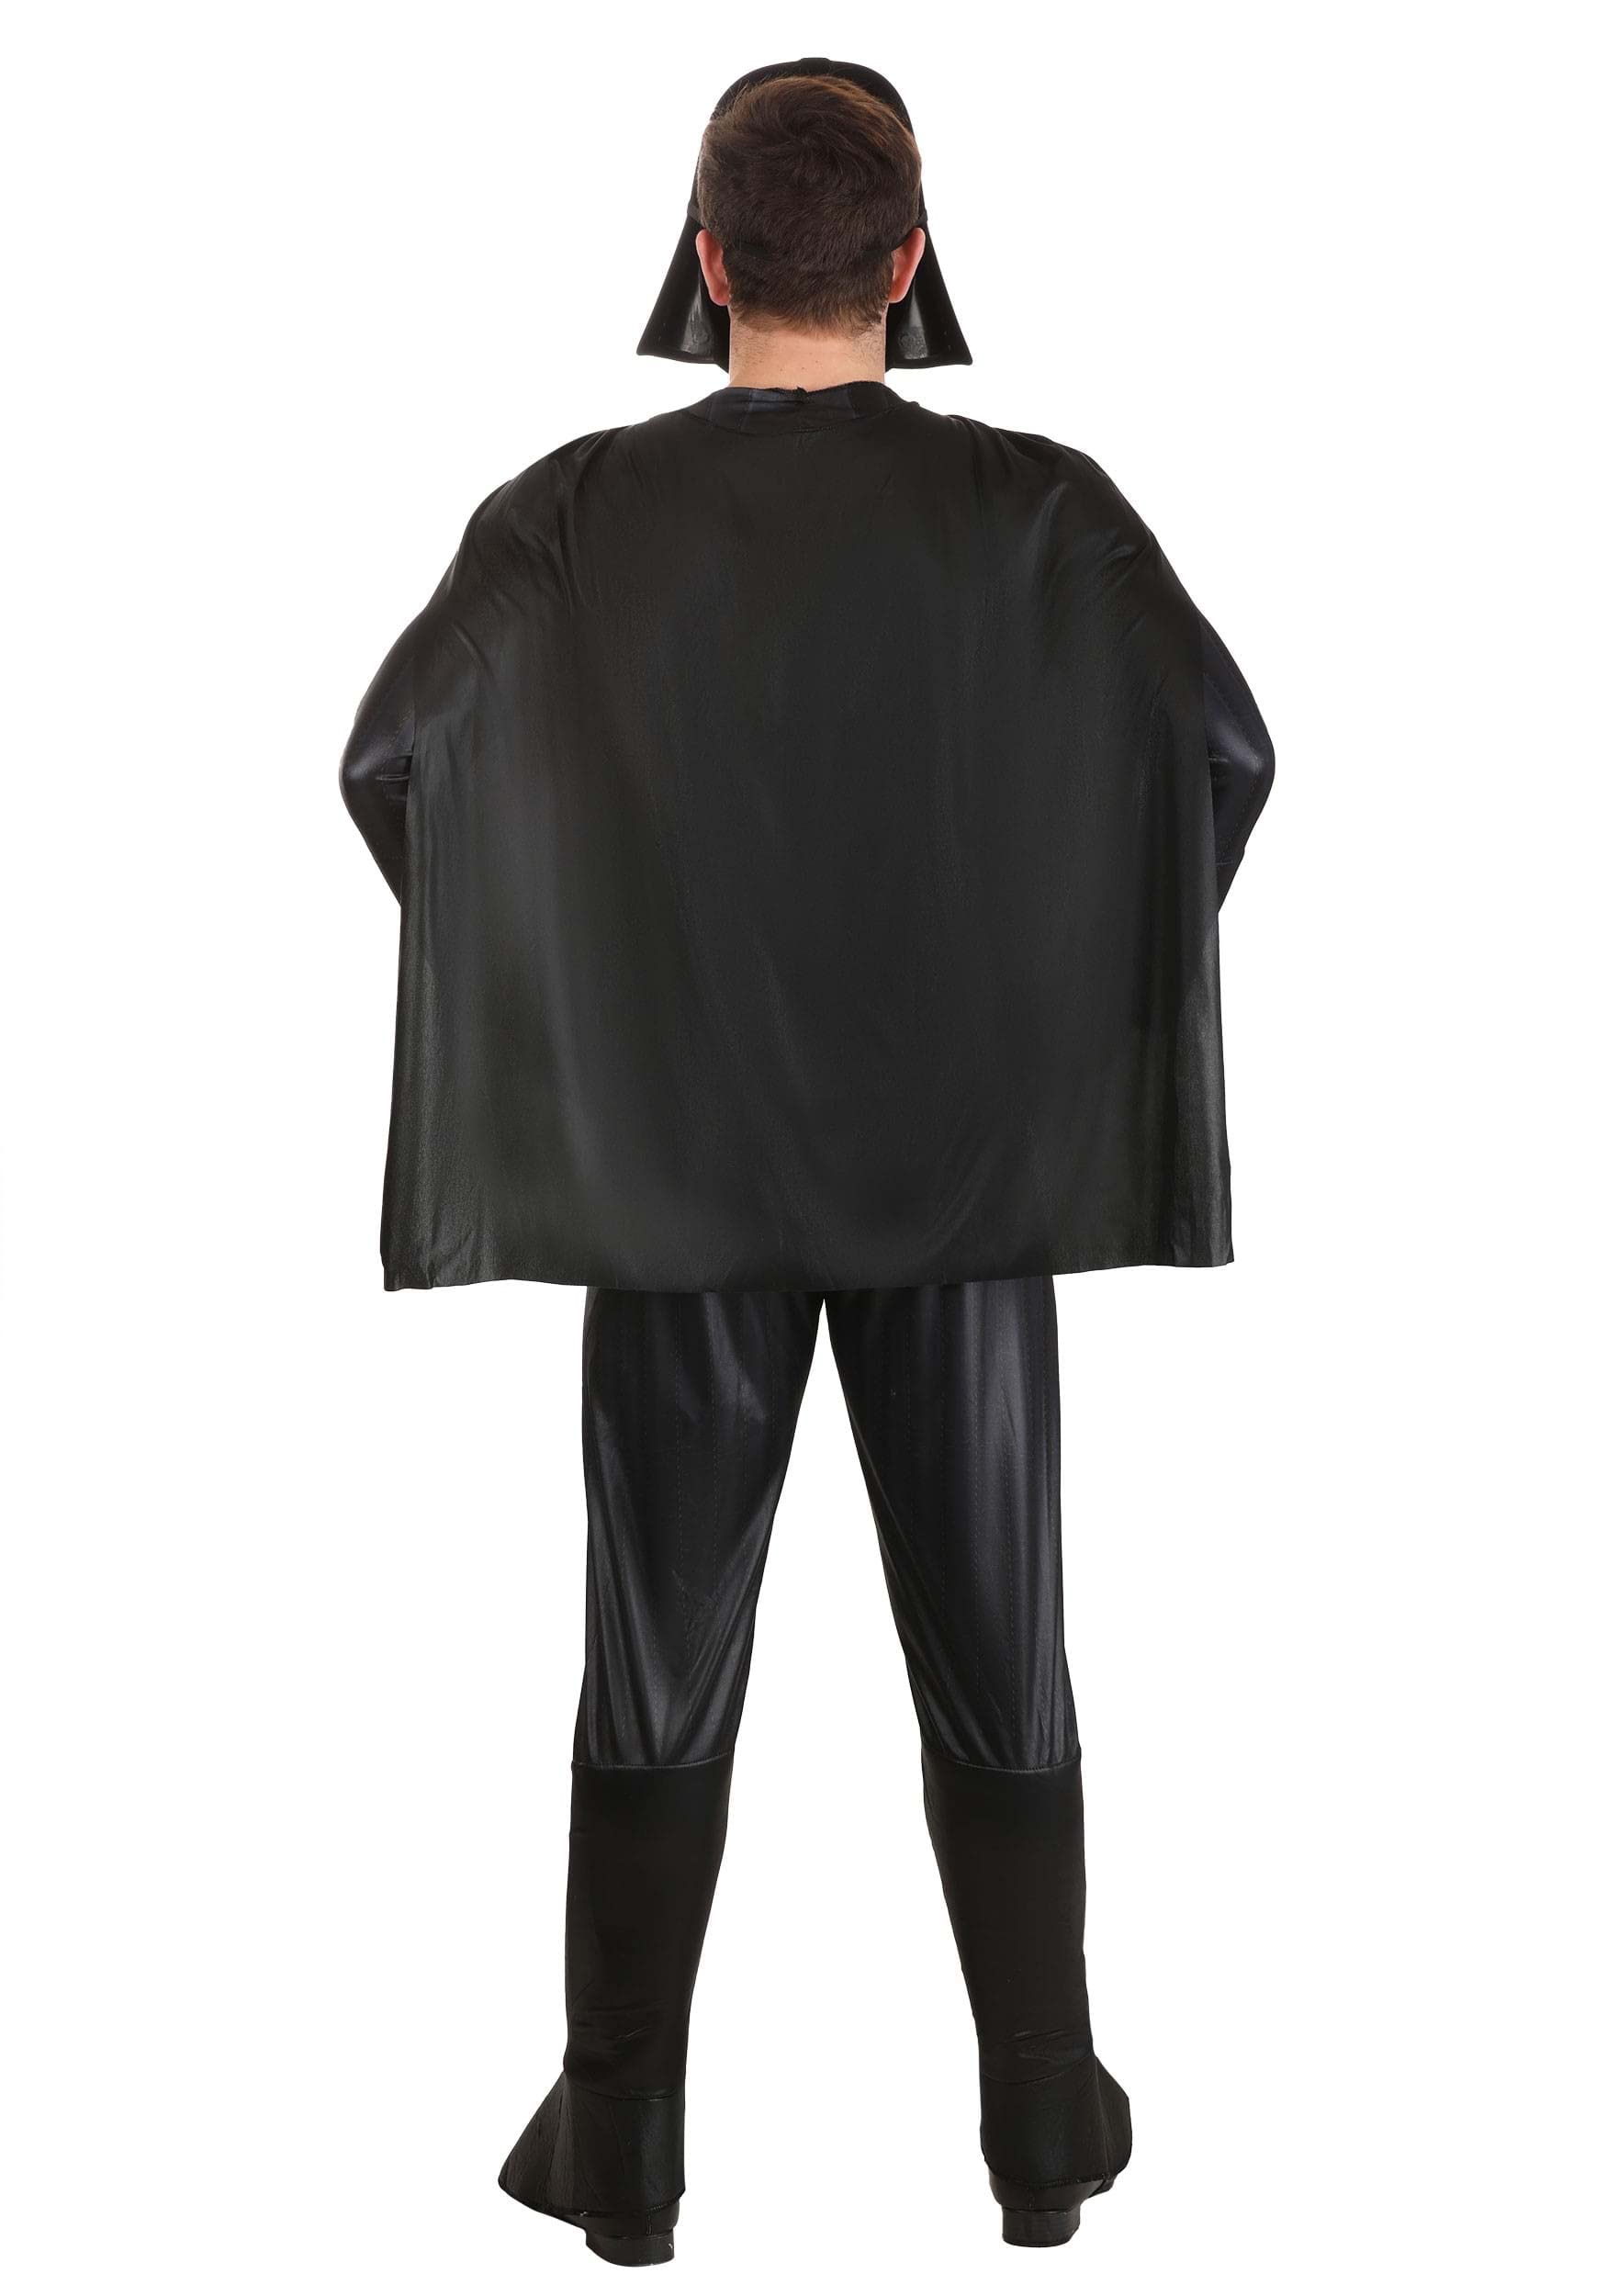 Star Wars Deluxe Adult Darth Vader Costume, Mens Halloween Costumes - Officially Licensed